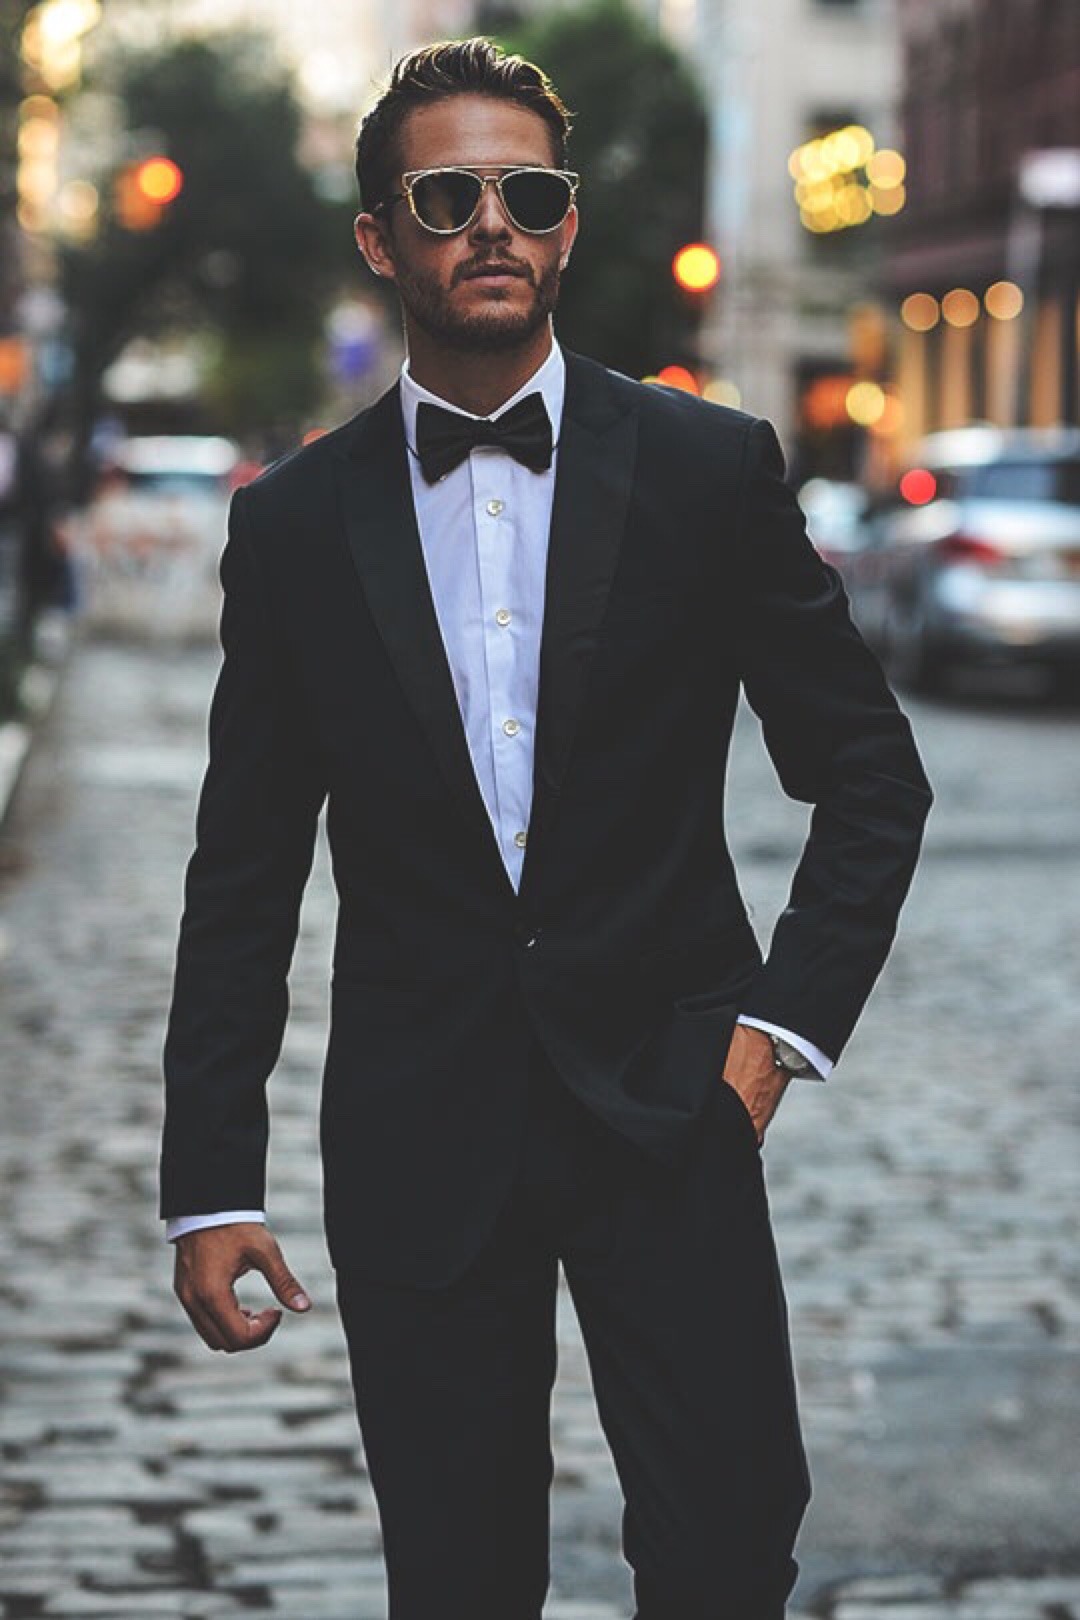 I Love Men In Suits — Clean never goes out of style!